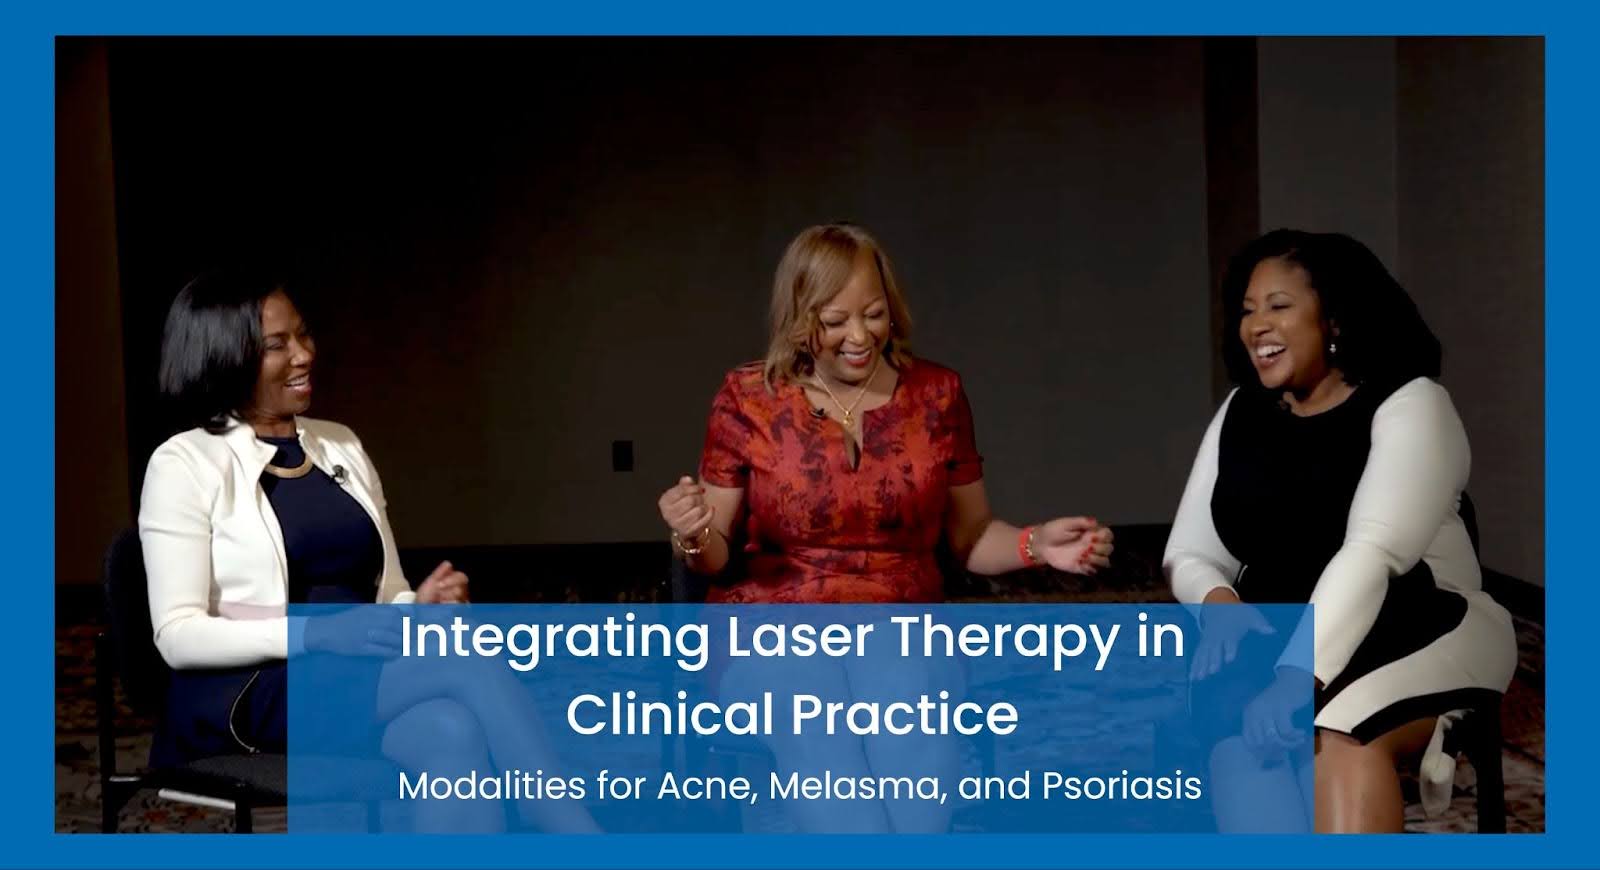 Integrating Laser Therapy in Clinical Practice: Modalities for Acne, Melasma, and Psoriasis